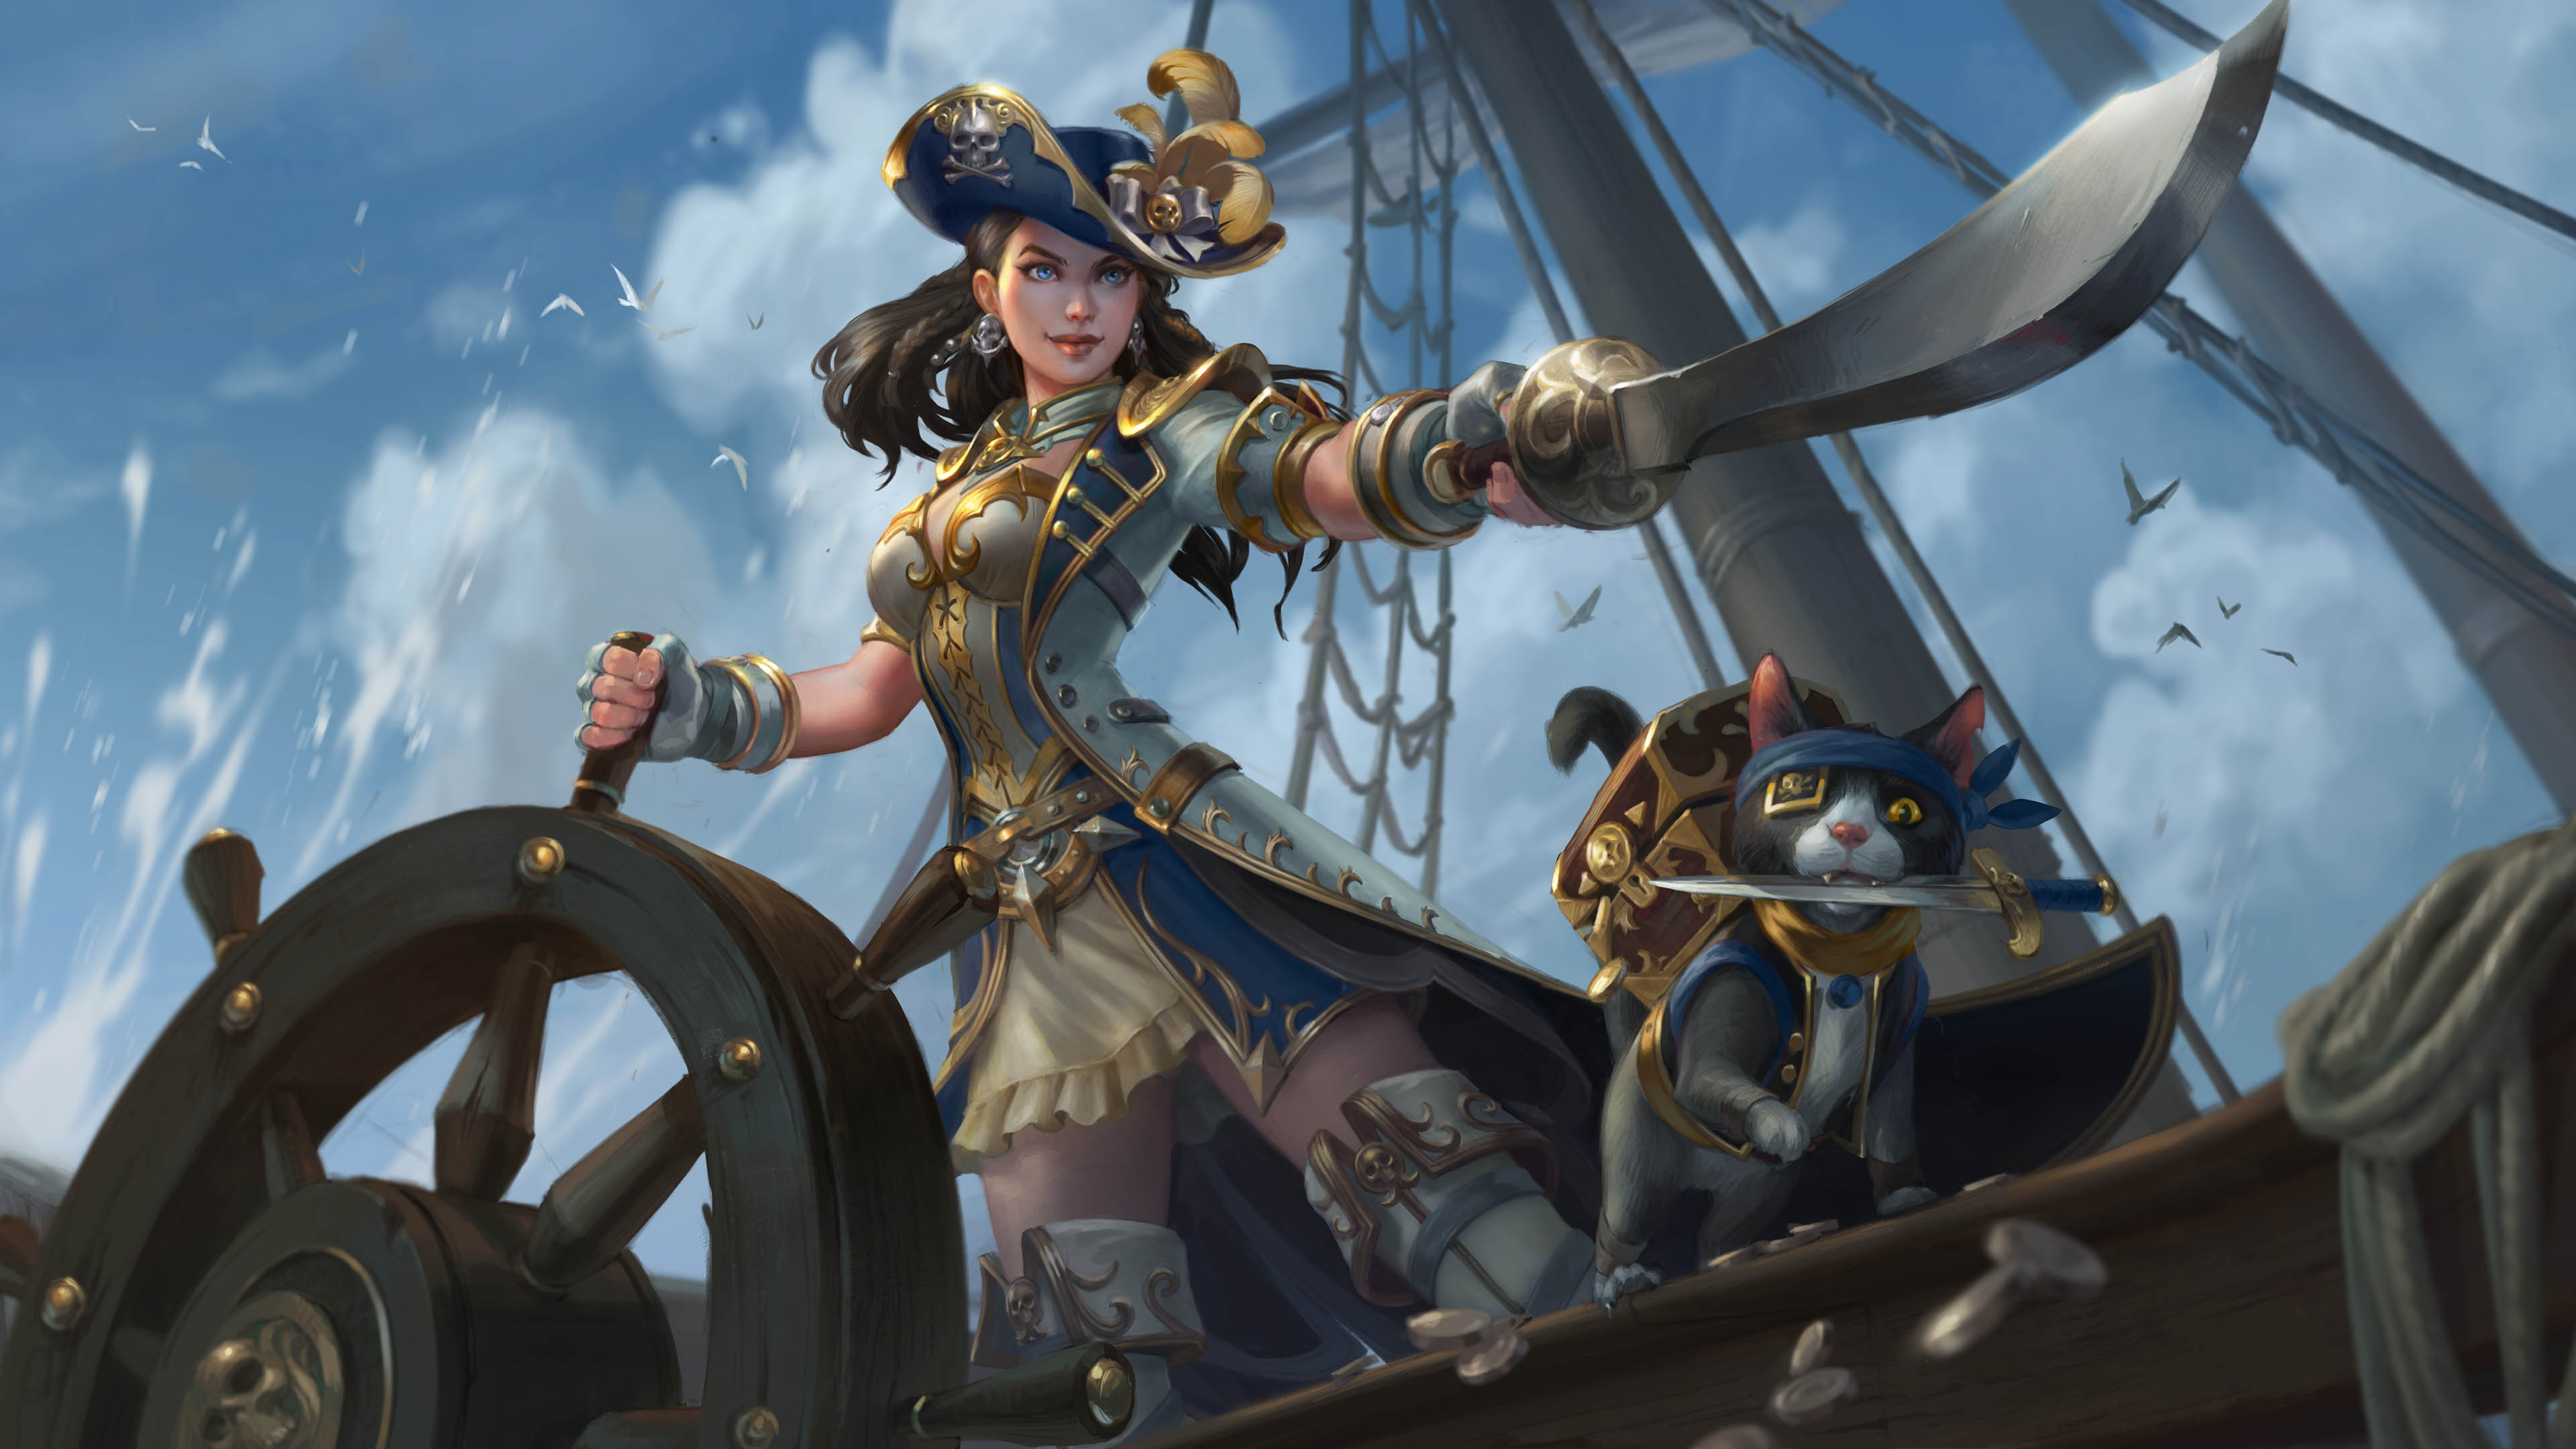 General 3840x2160 Smite Chang'e (Smite) pirates women with swords PC gaming brunette video game girls hat women with hats fantasy art fantasy girl